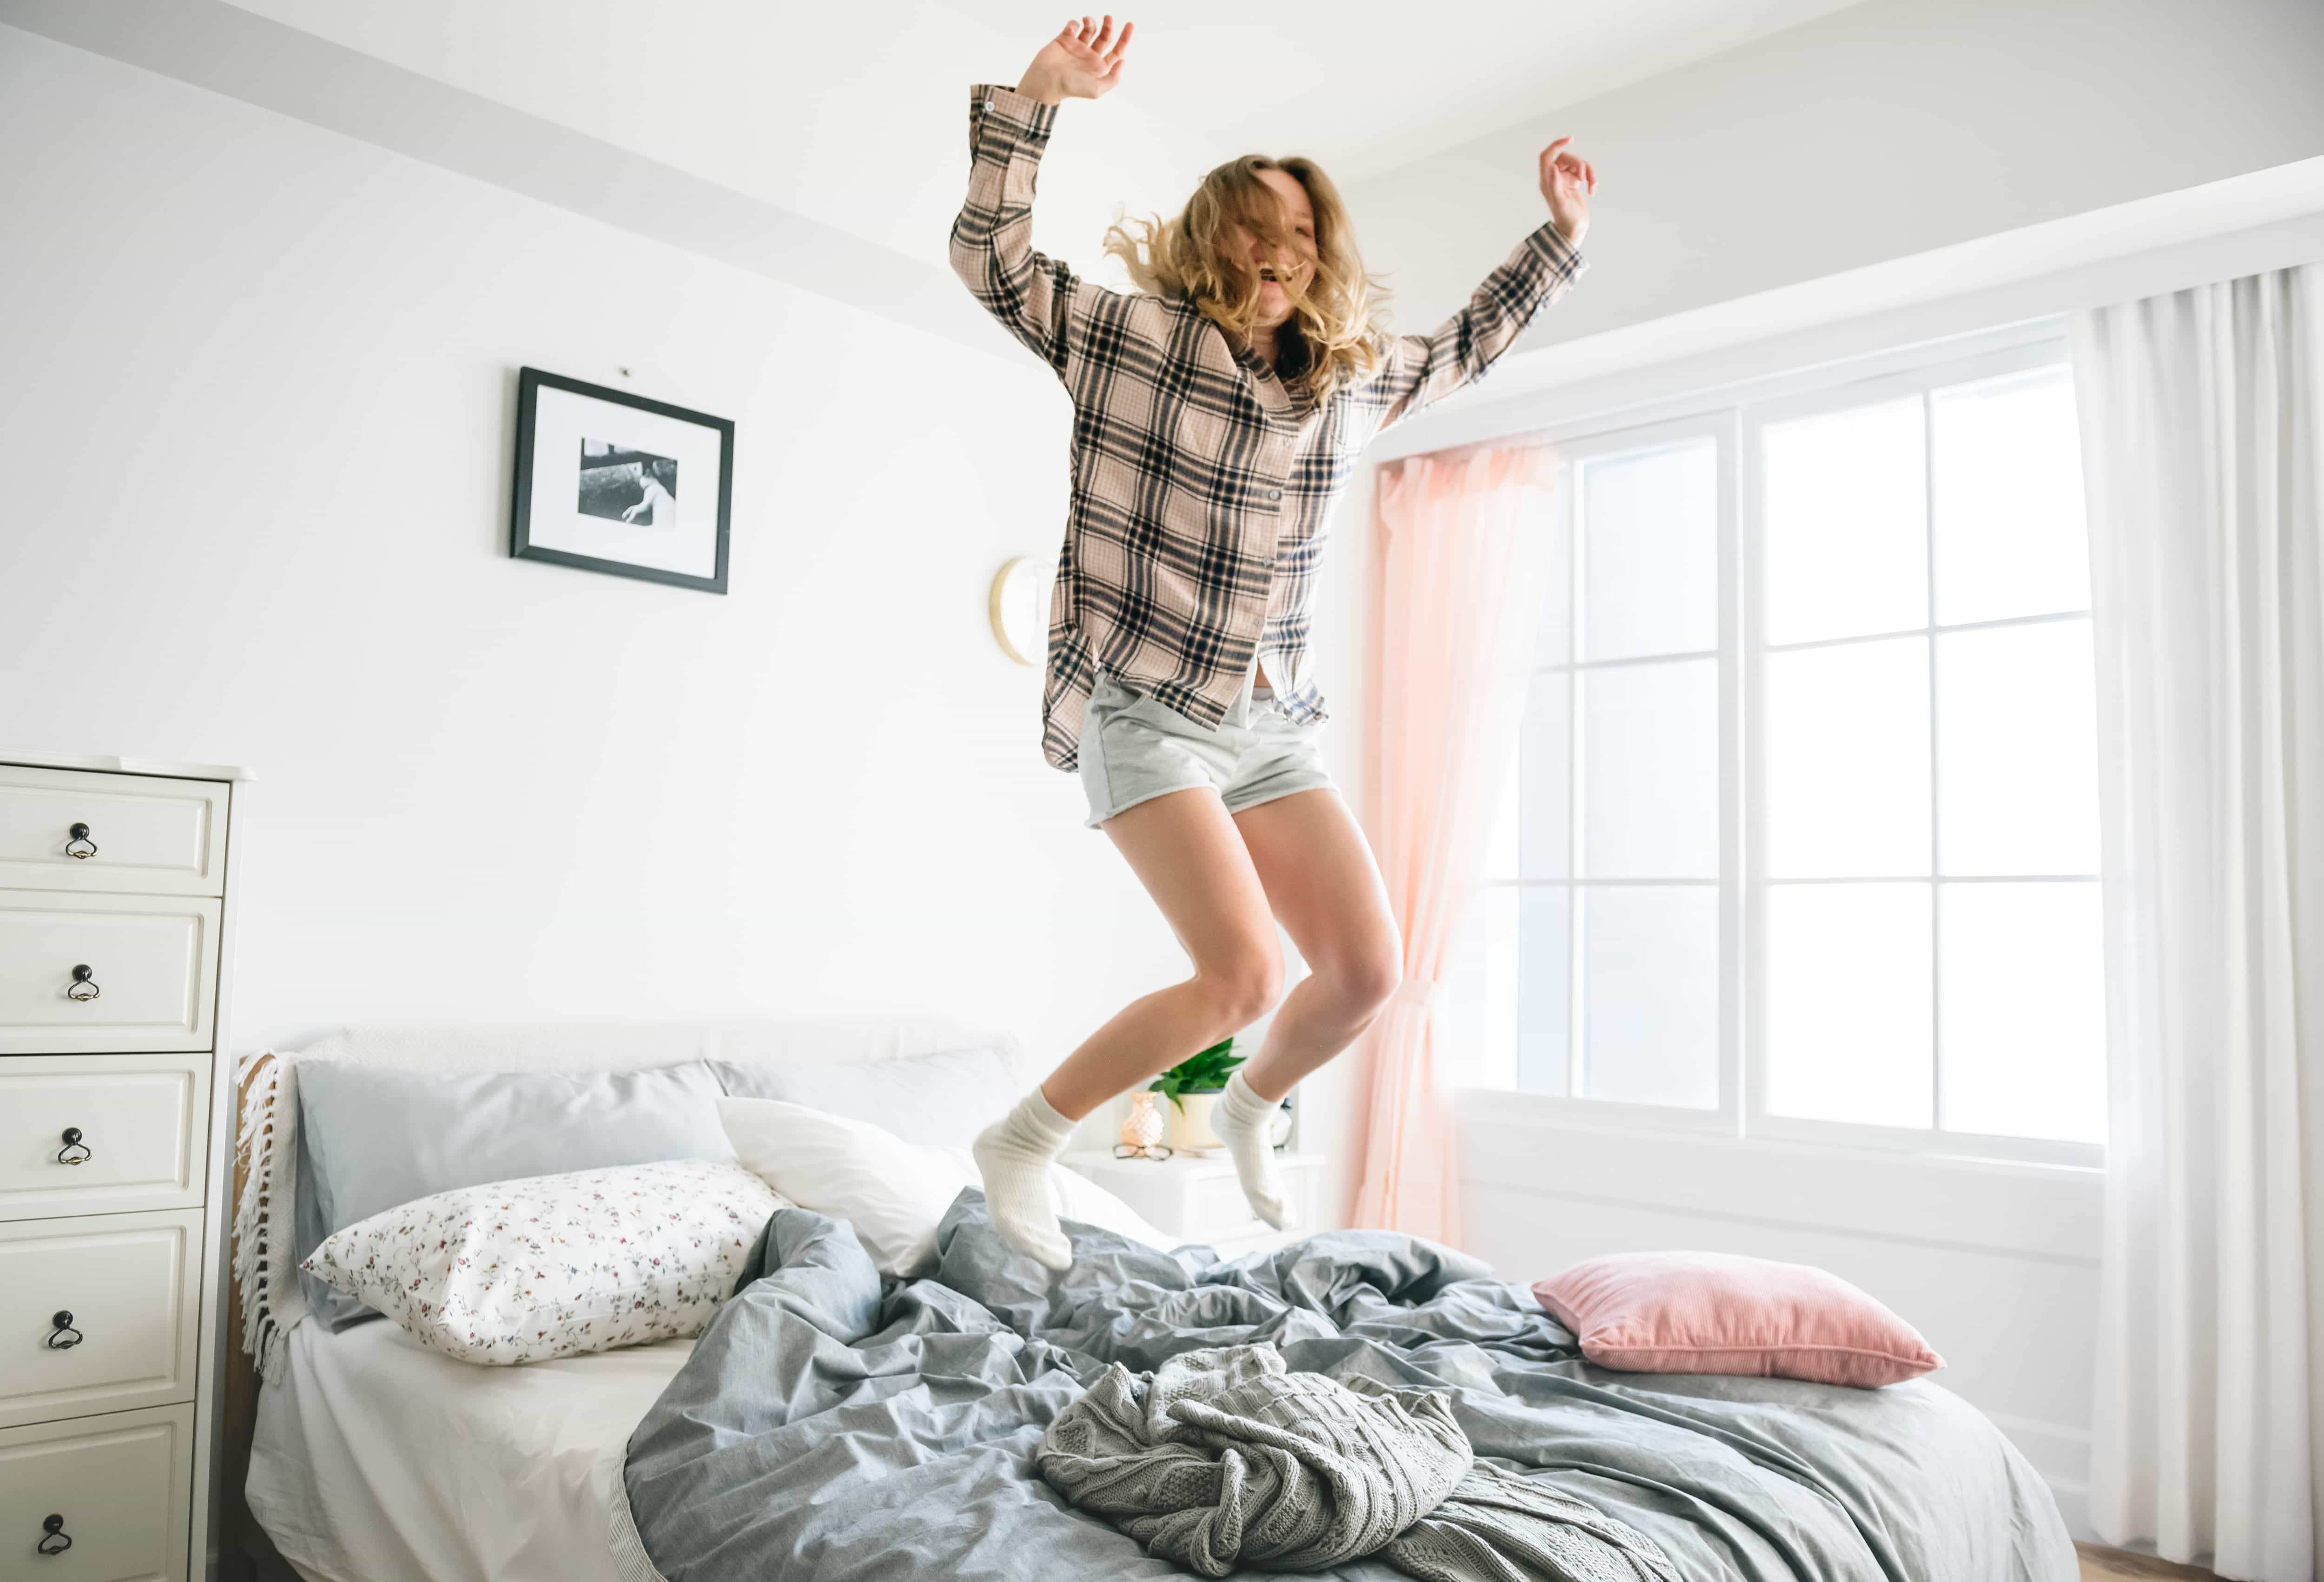 Woman jumping on a bed